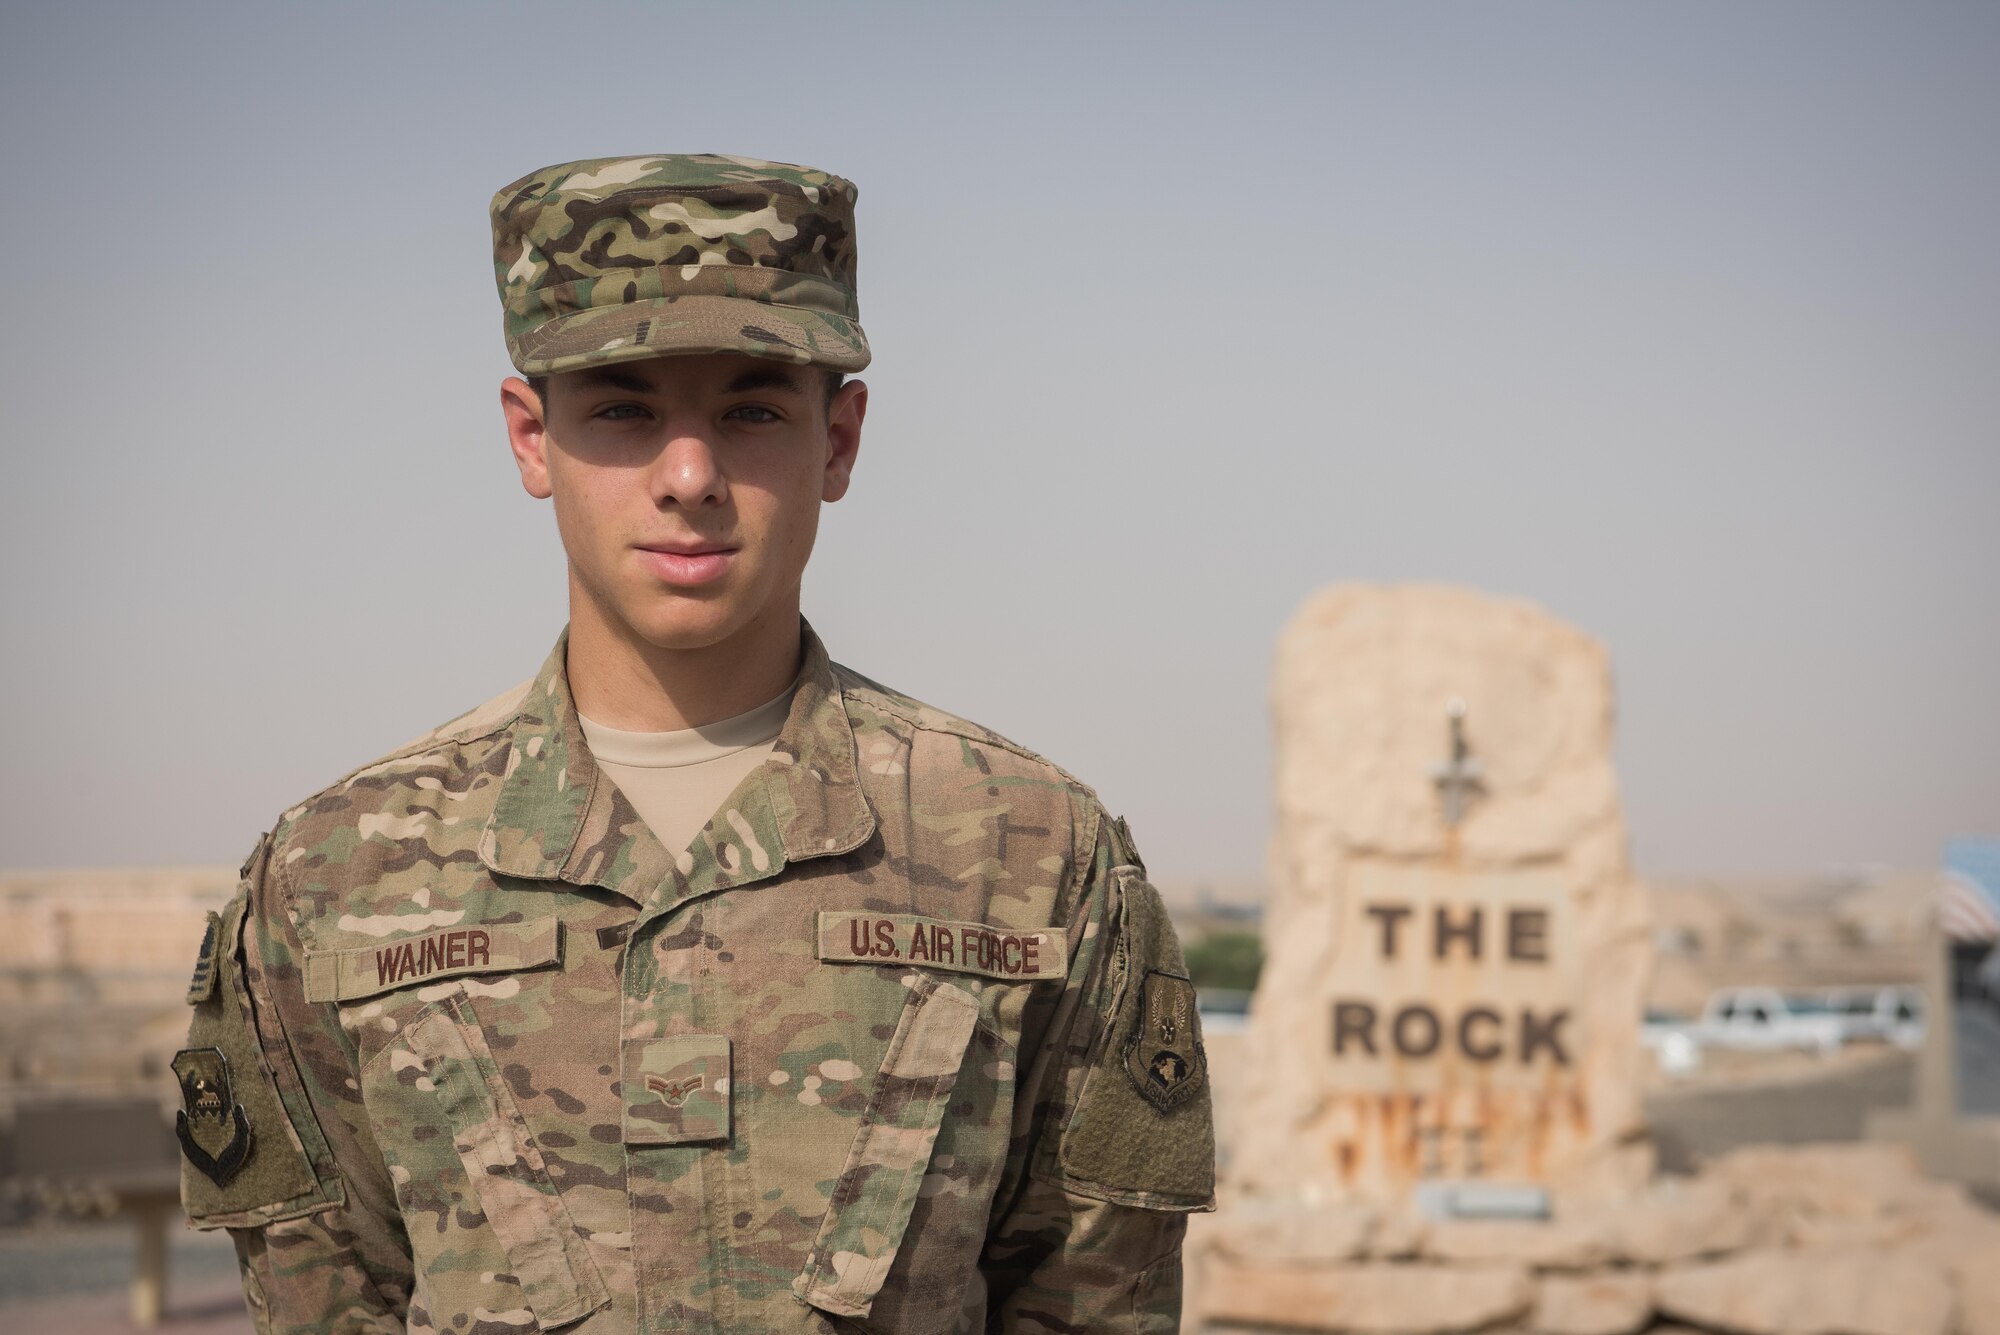 This week's Rock Solid Warrior is Airman 1st Class Jason Wainer, a cyber transport systems technician, deployed from Robins Air Force Base, Ga. The Rock Solid Warrior program is a way to recognize and spotlight the Airmen of the 386th Air Expeditionary Wing for their positive impact and commitment to the mission.